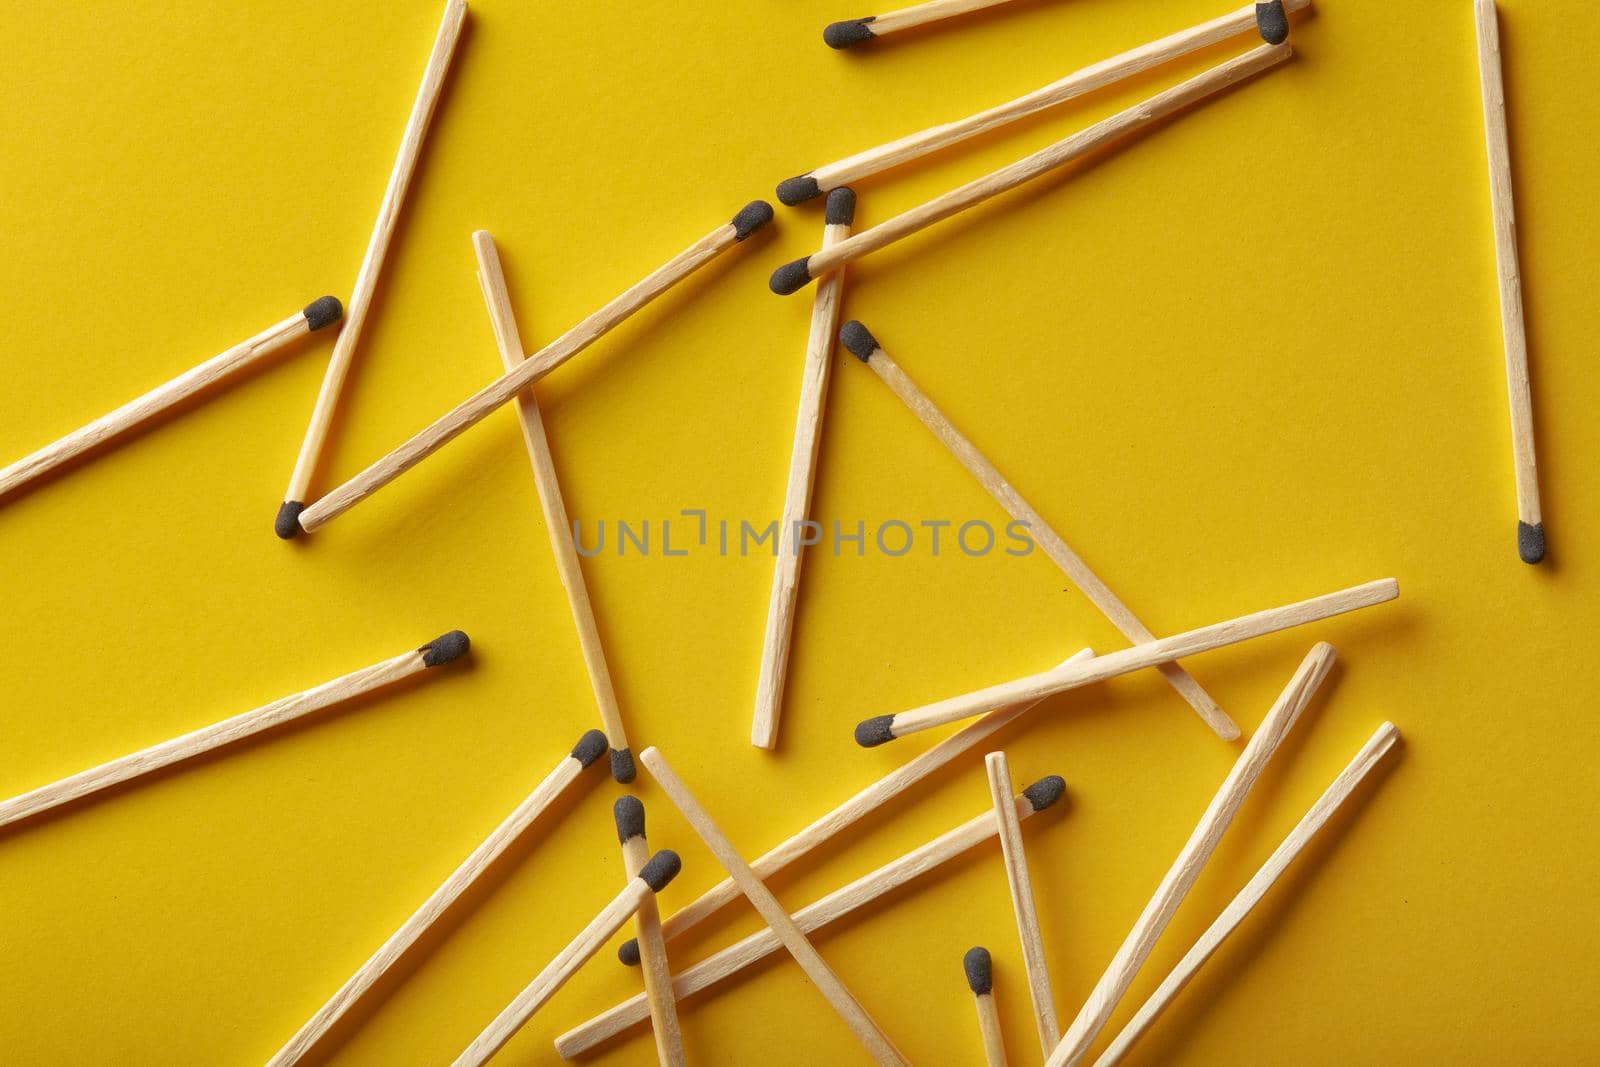 Matches on a yellow background, an abstraction about teamwork and modern relationships.